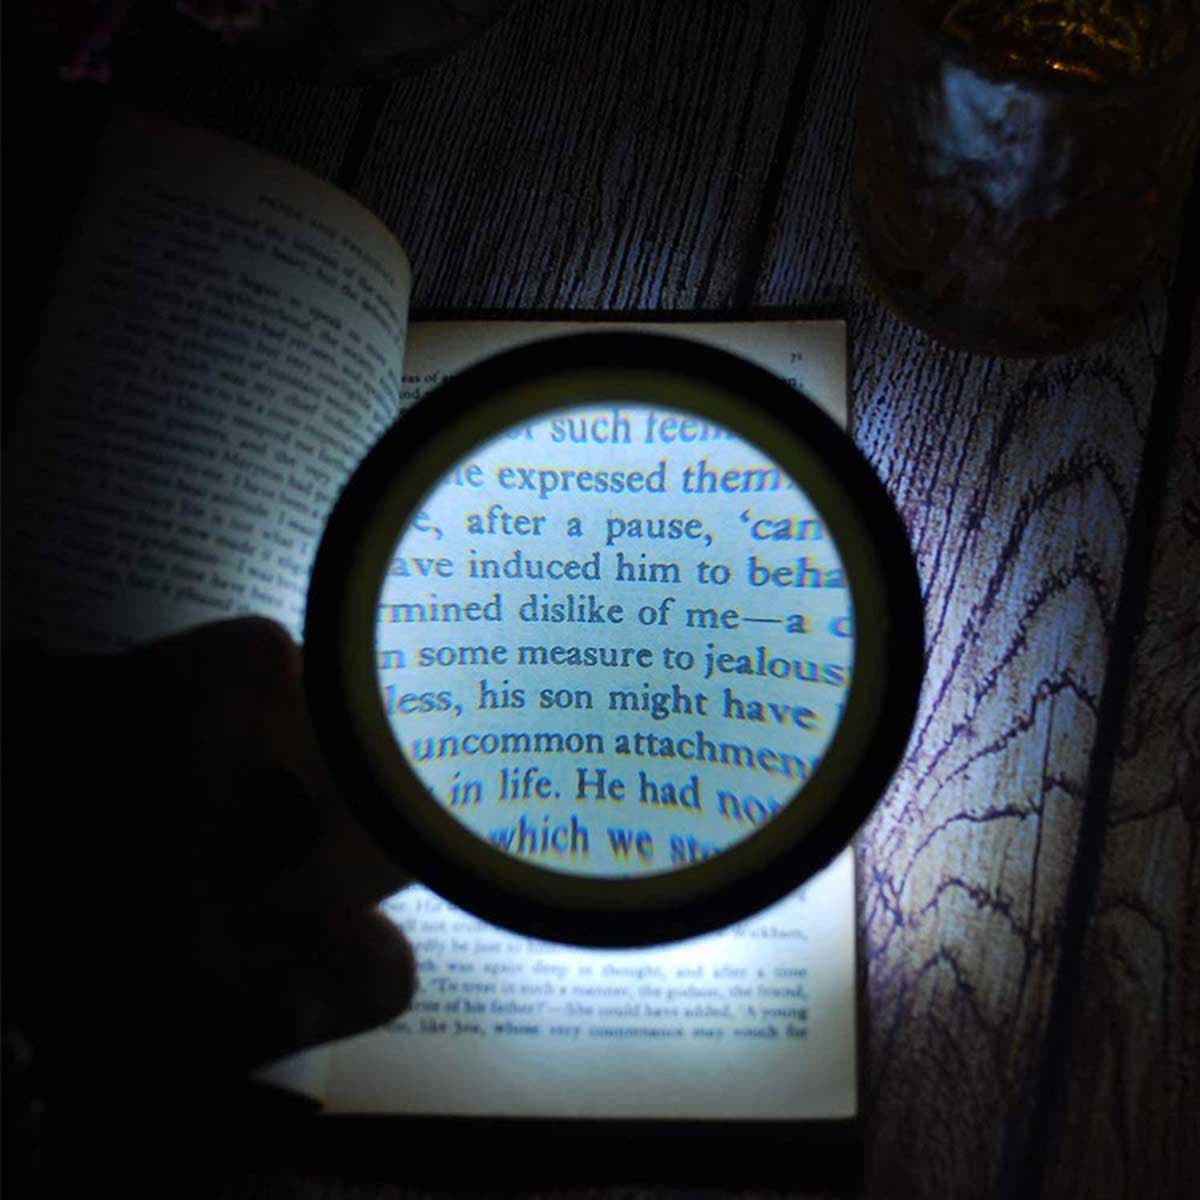 rohs led light reading magnifying glass For Flawless Viewing And